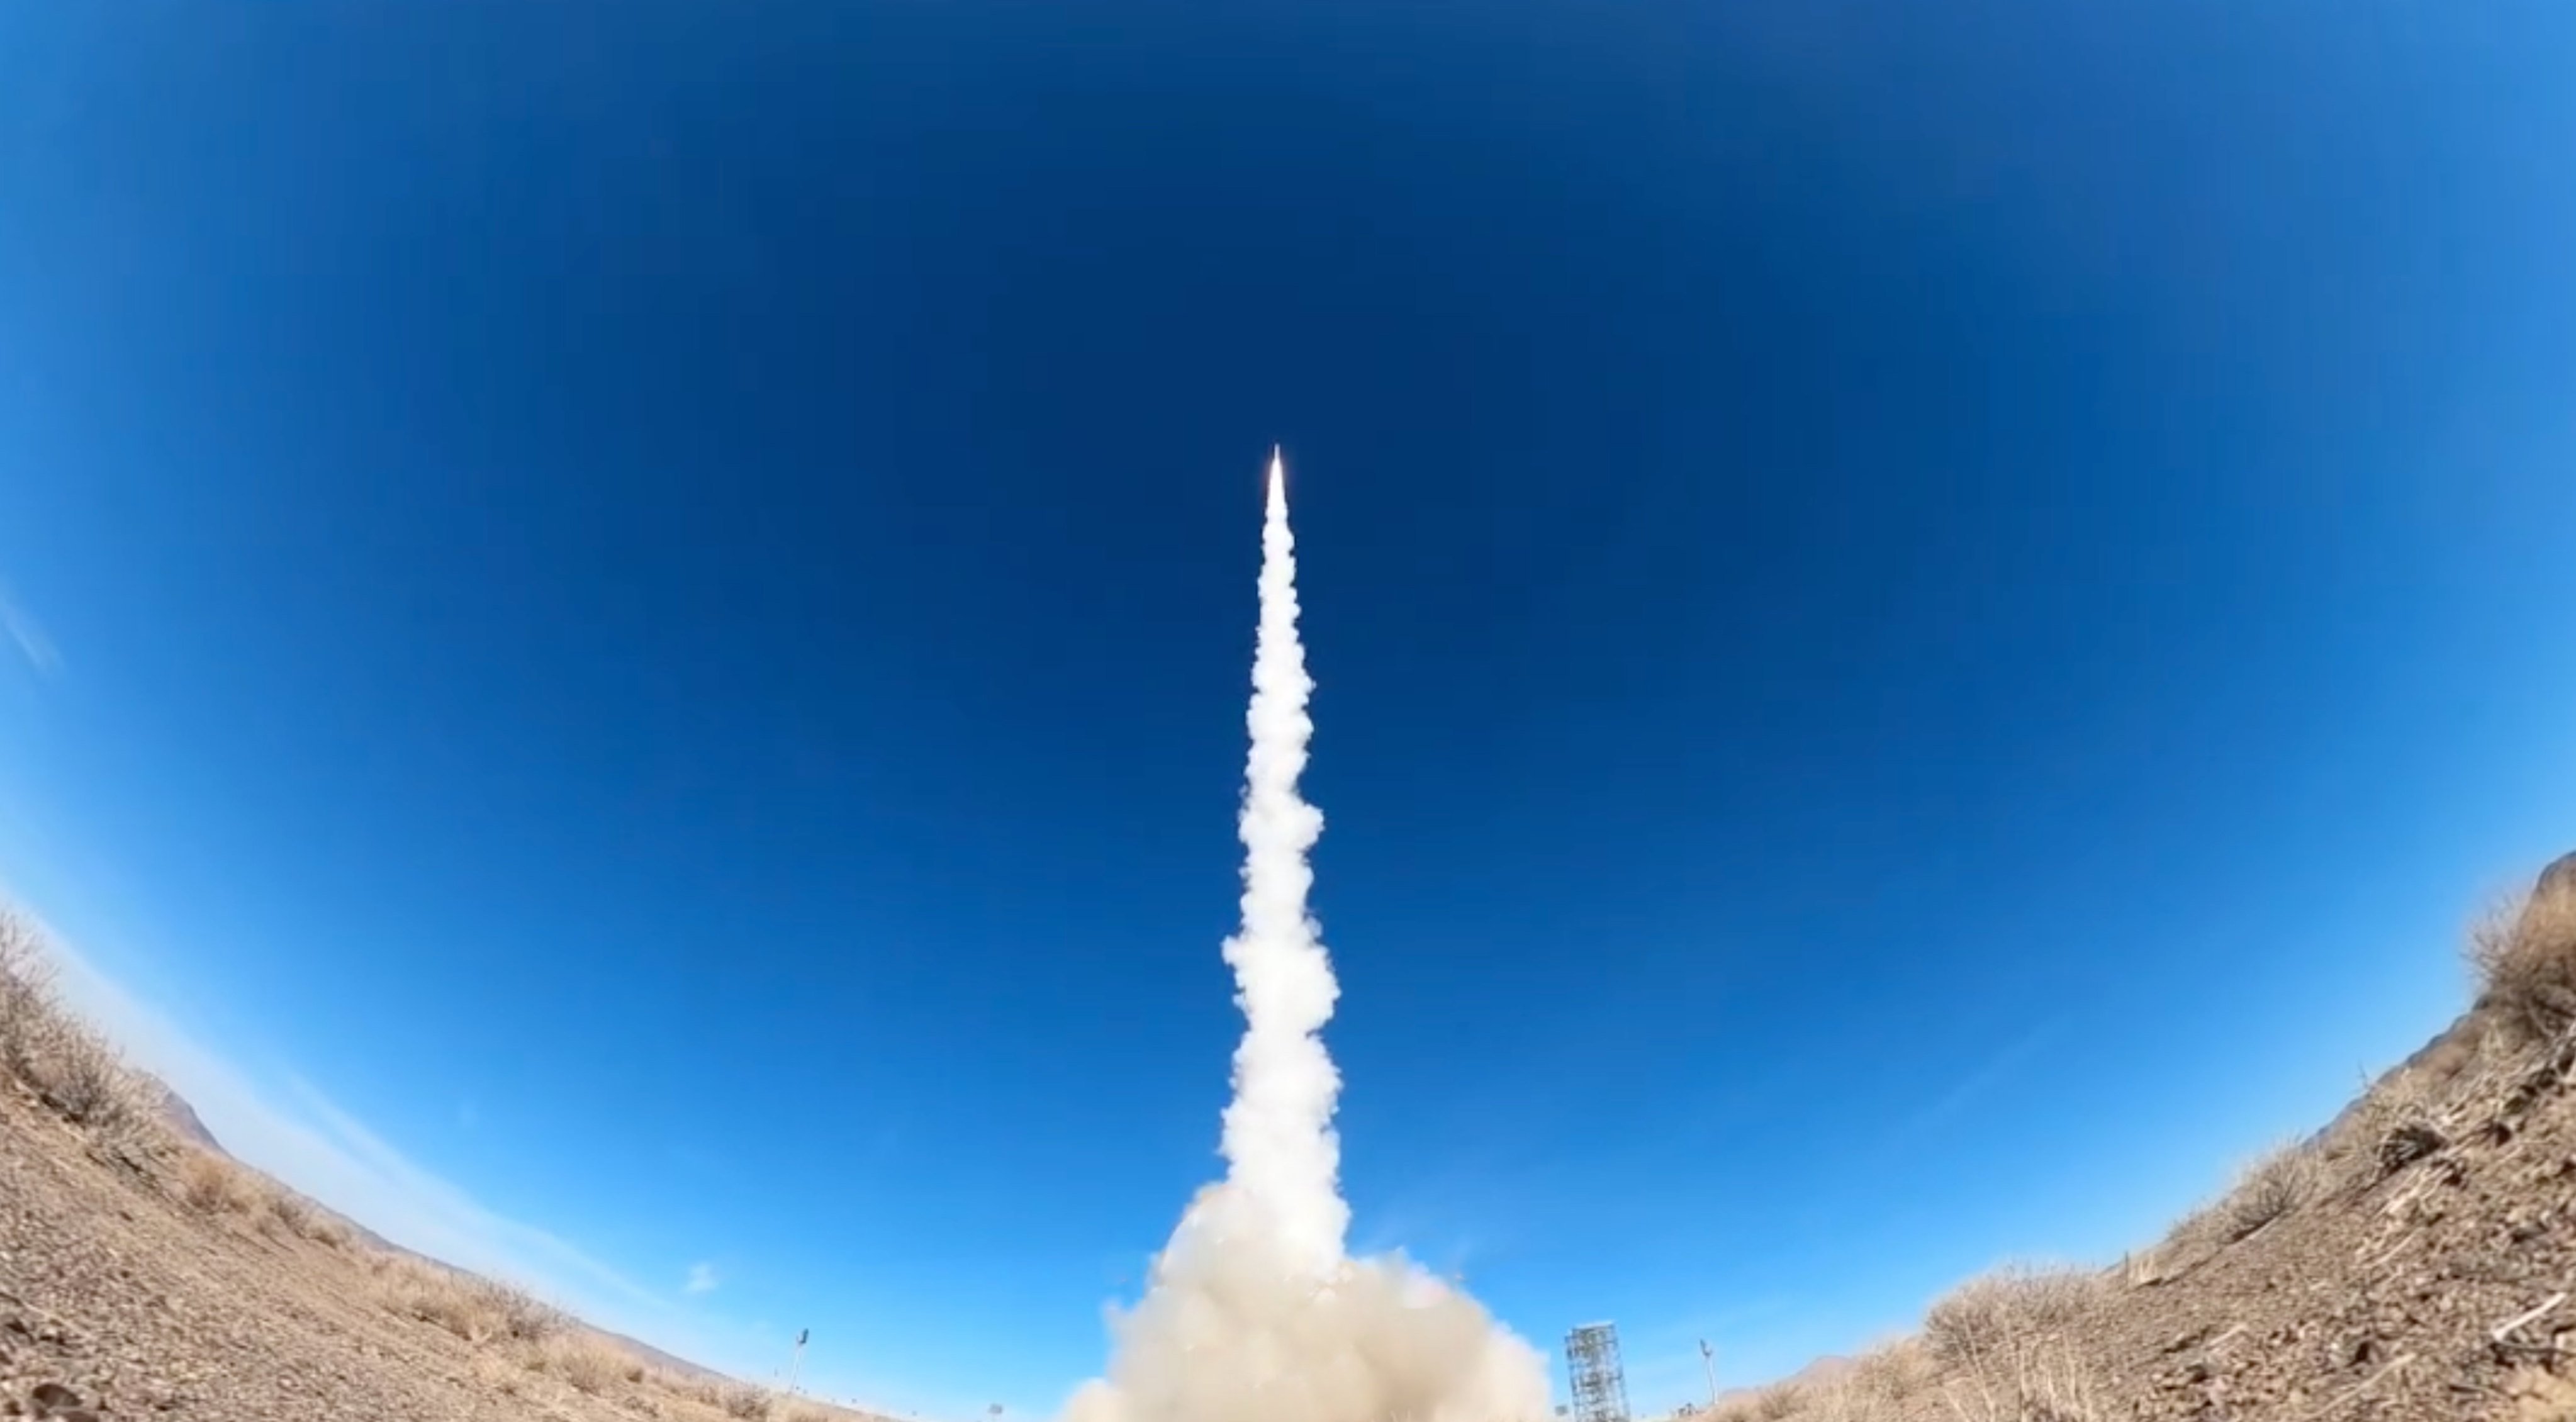 Iran said on Saturday it had conducted a successful satellite launch into its highest orbit yet, the latest for a program the West fears improves Tehran’s ballistic missiles. Photo: Weibo